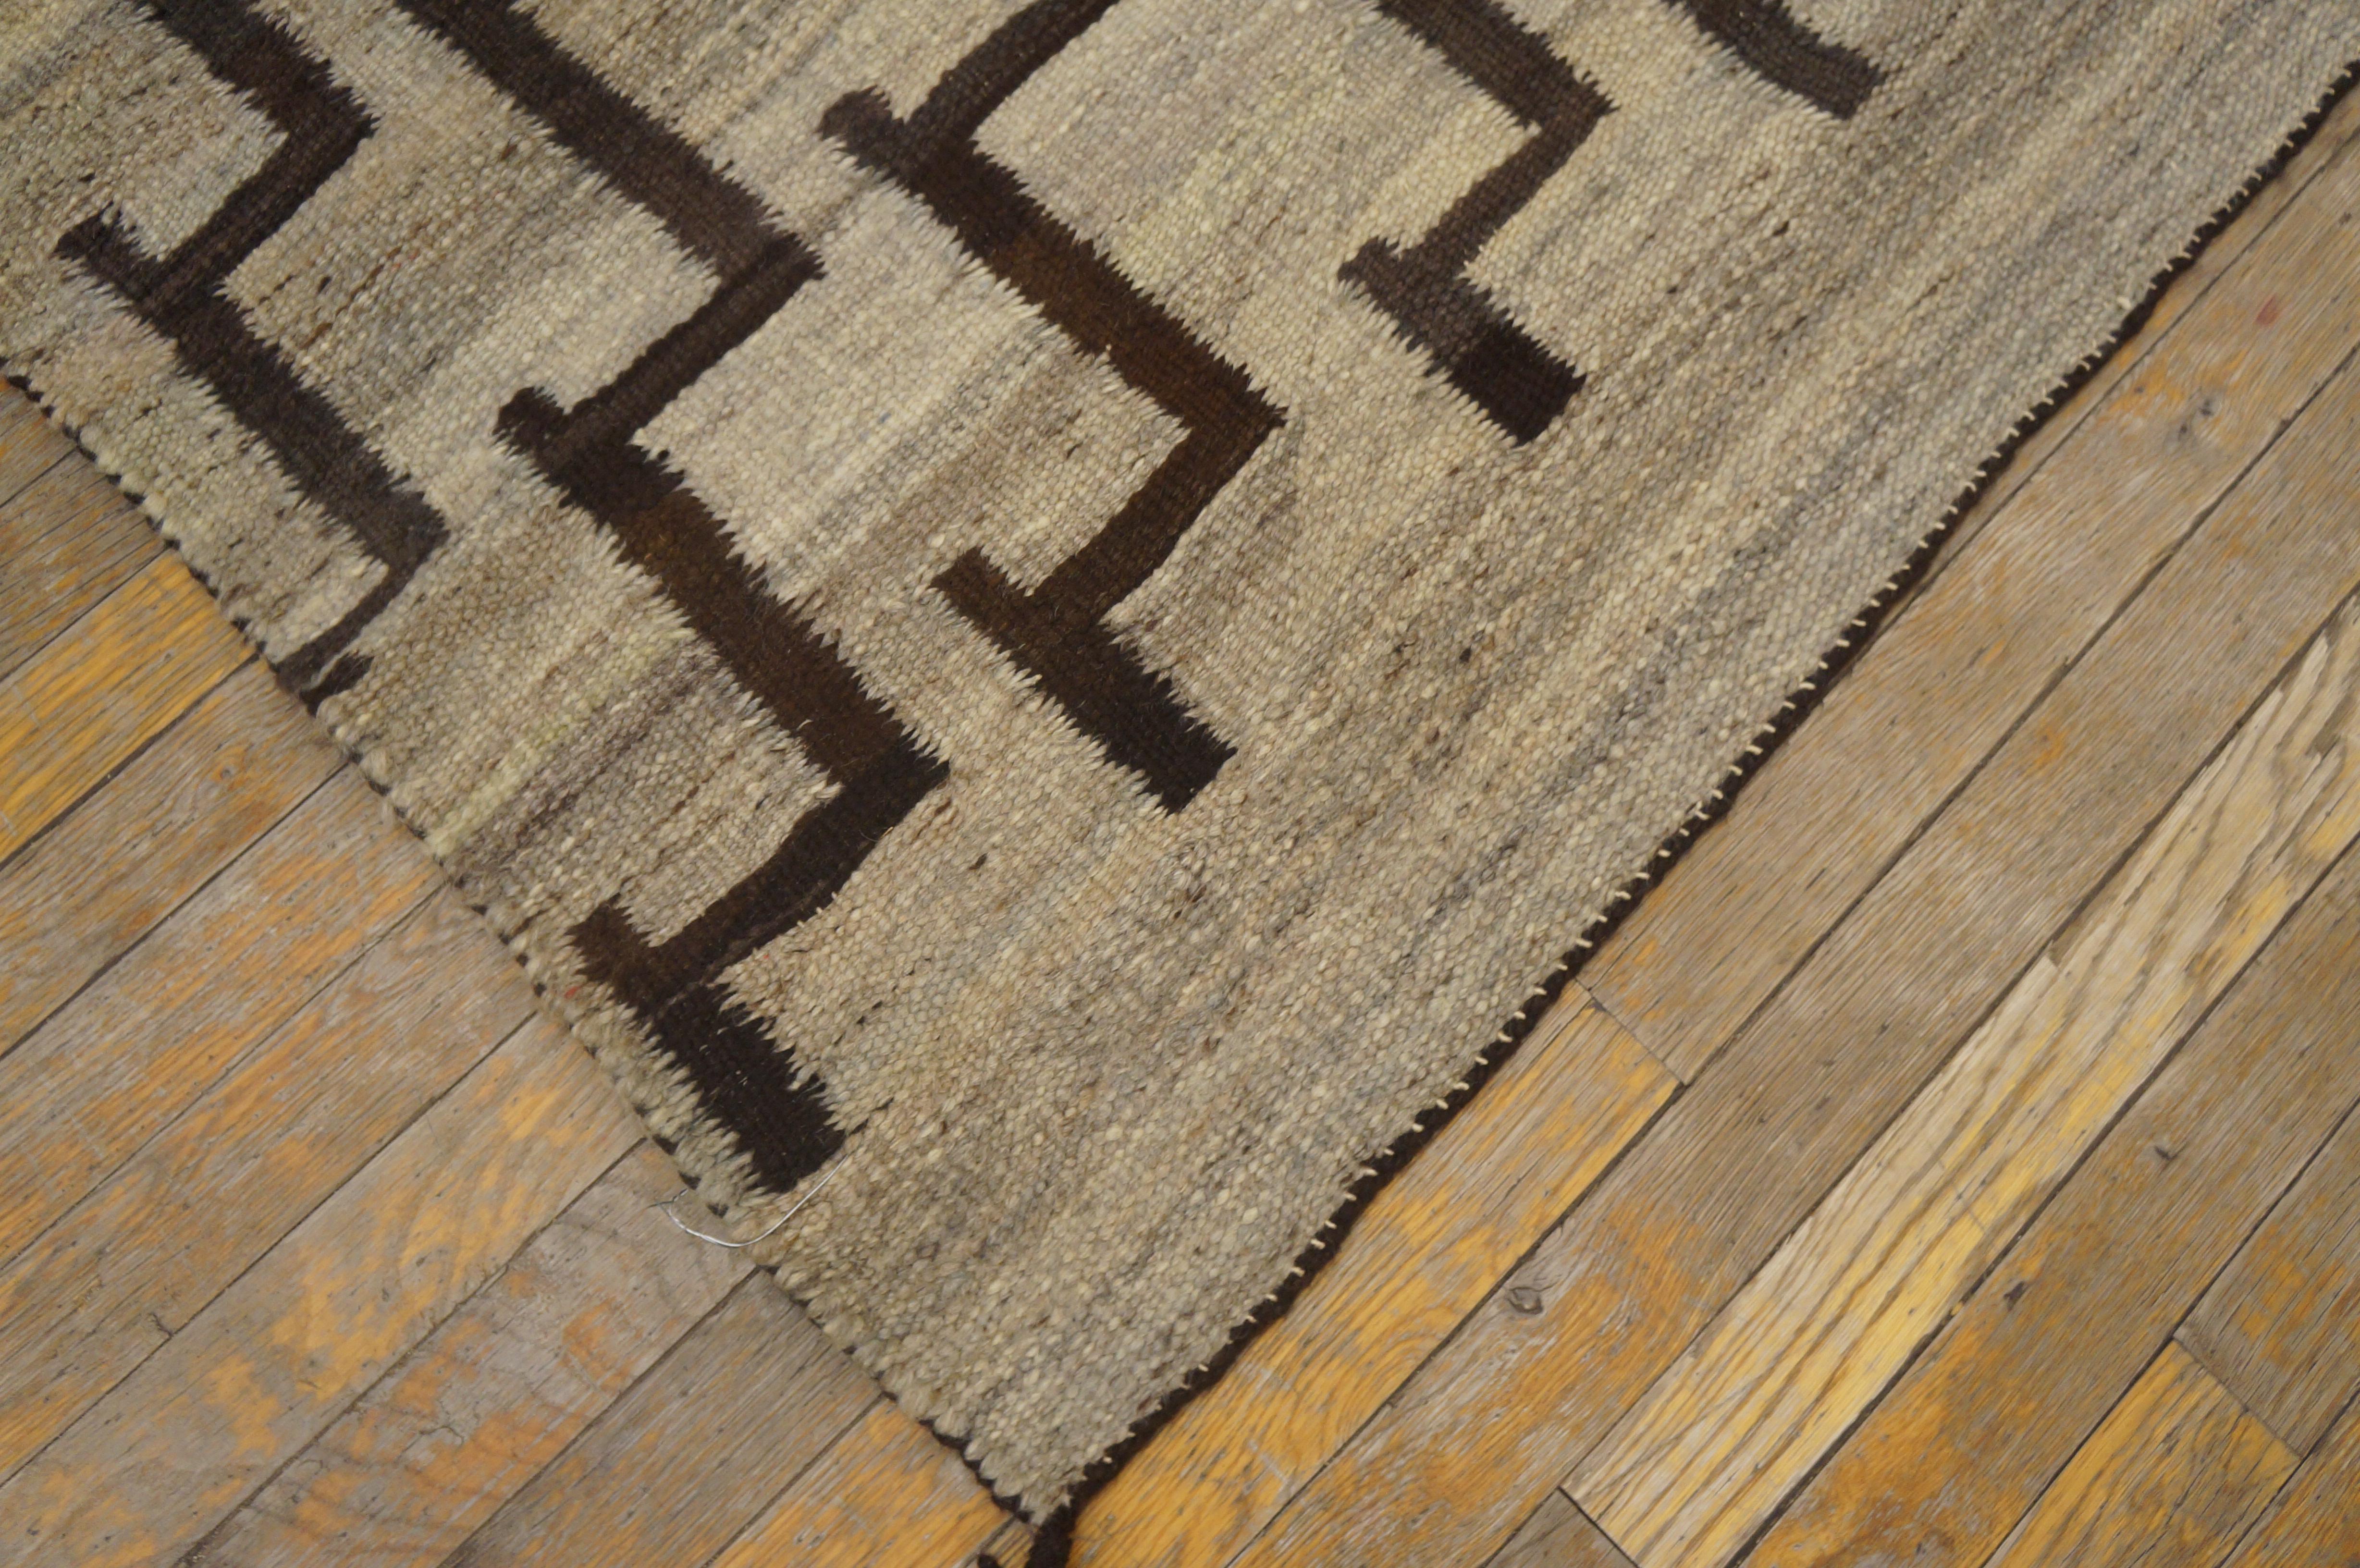 Early 20th Century American Transitional Period Navajo Carpet 
4'9